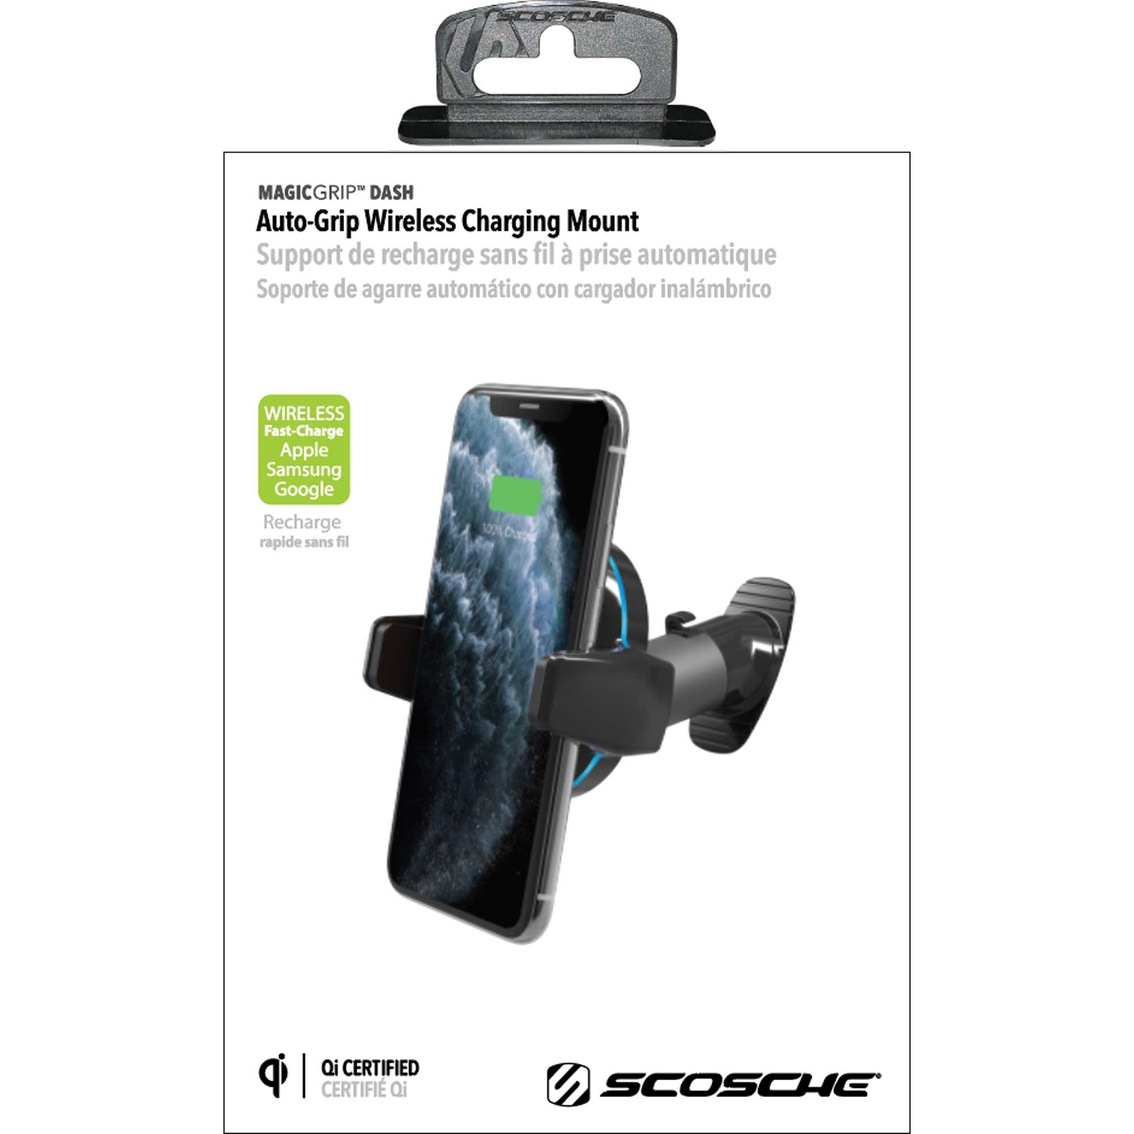 Scosche 3-in-1 Universal Car Mount, Suction Cup Mount for Mobile